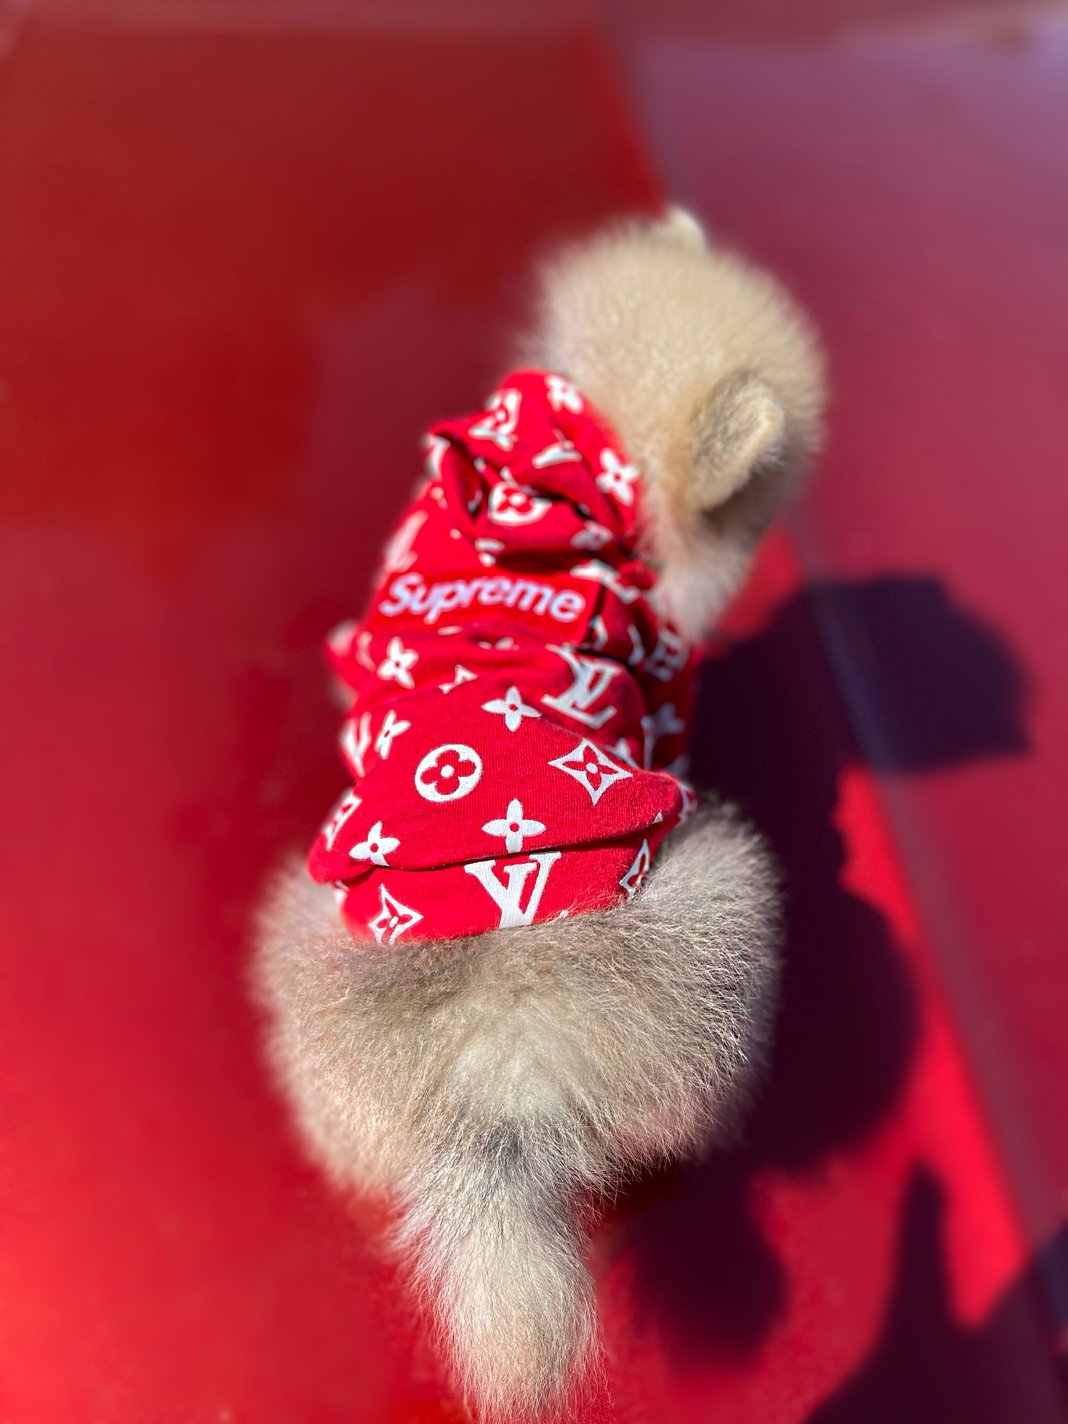 Louis Vuitton LV supreme dog hoodie  Dog clothes, Dog accessories, Dog  swags